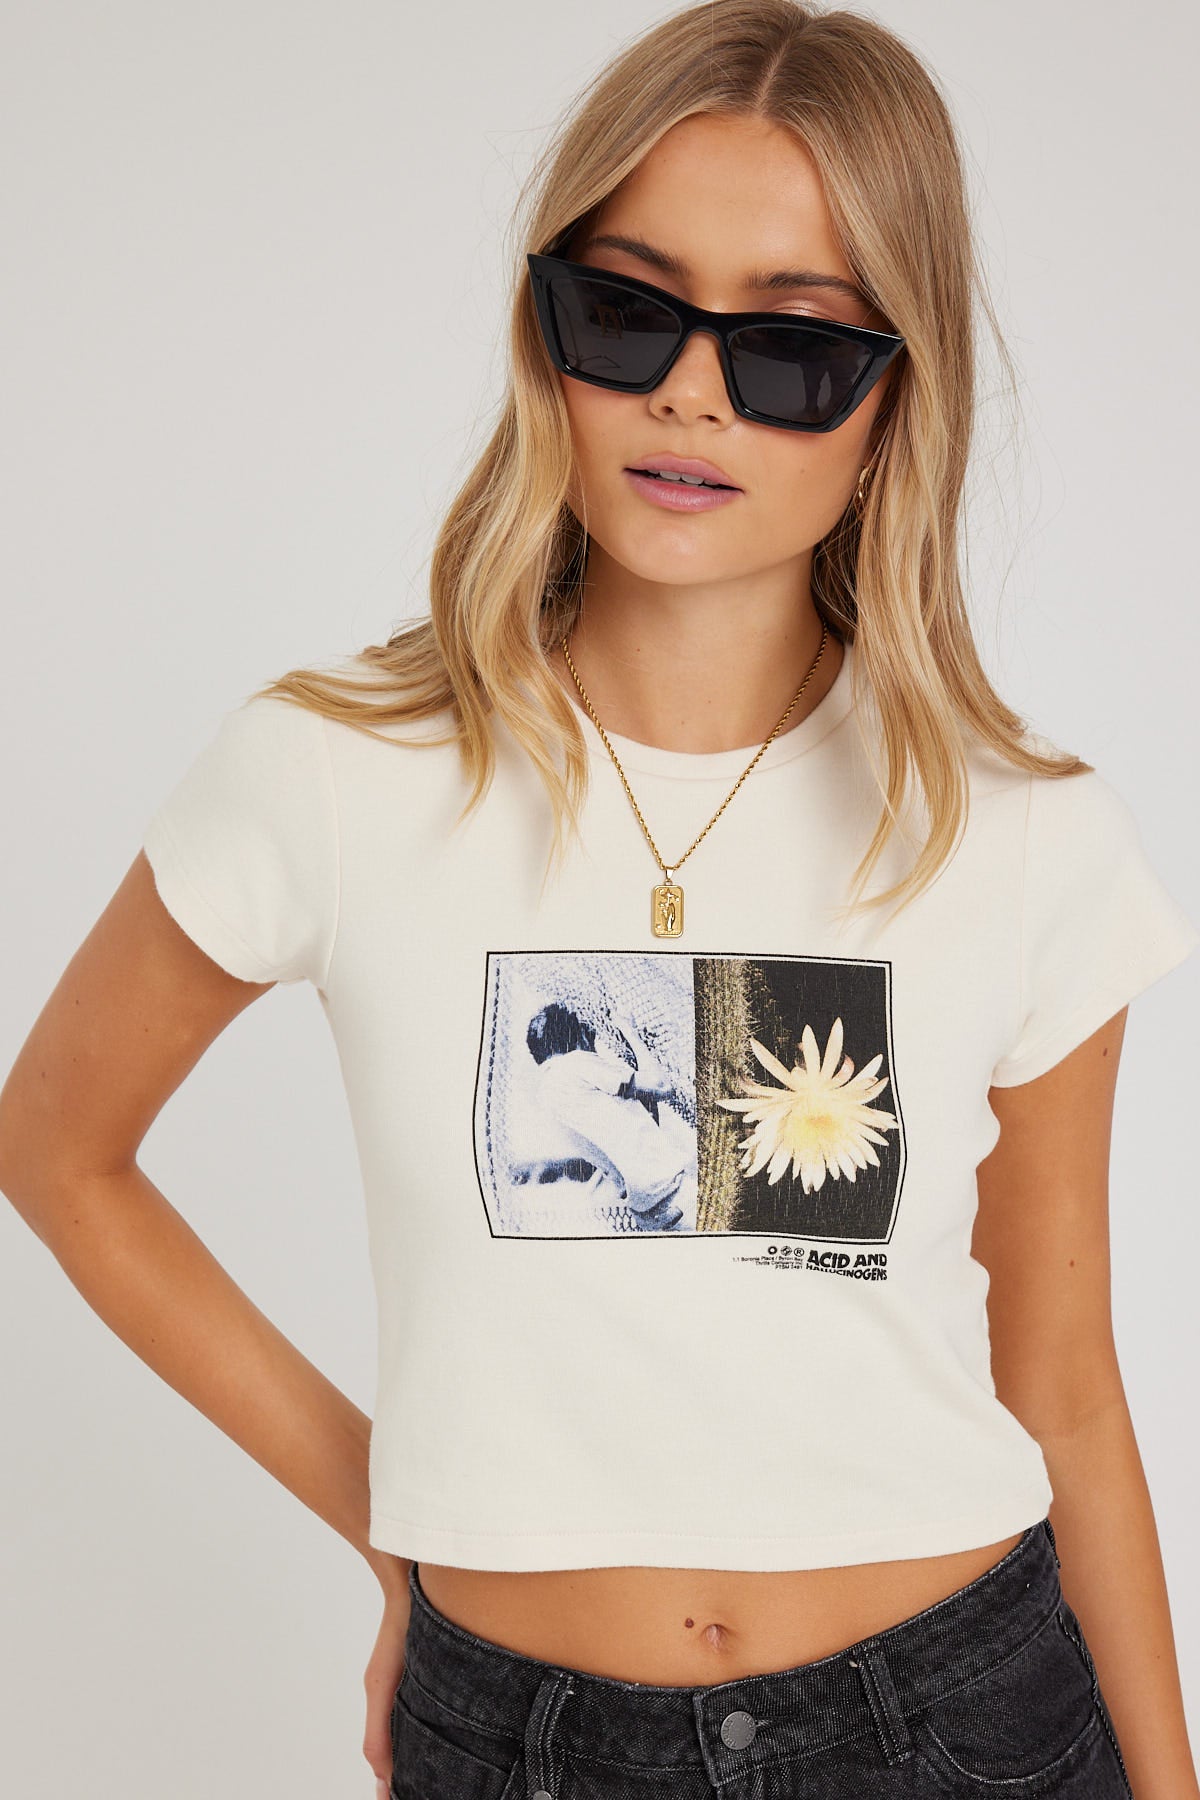 Thrills A and H Mini Tee Heritage White